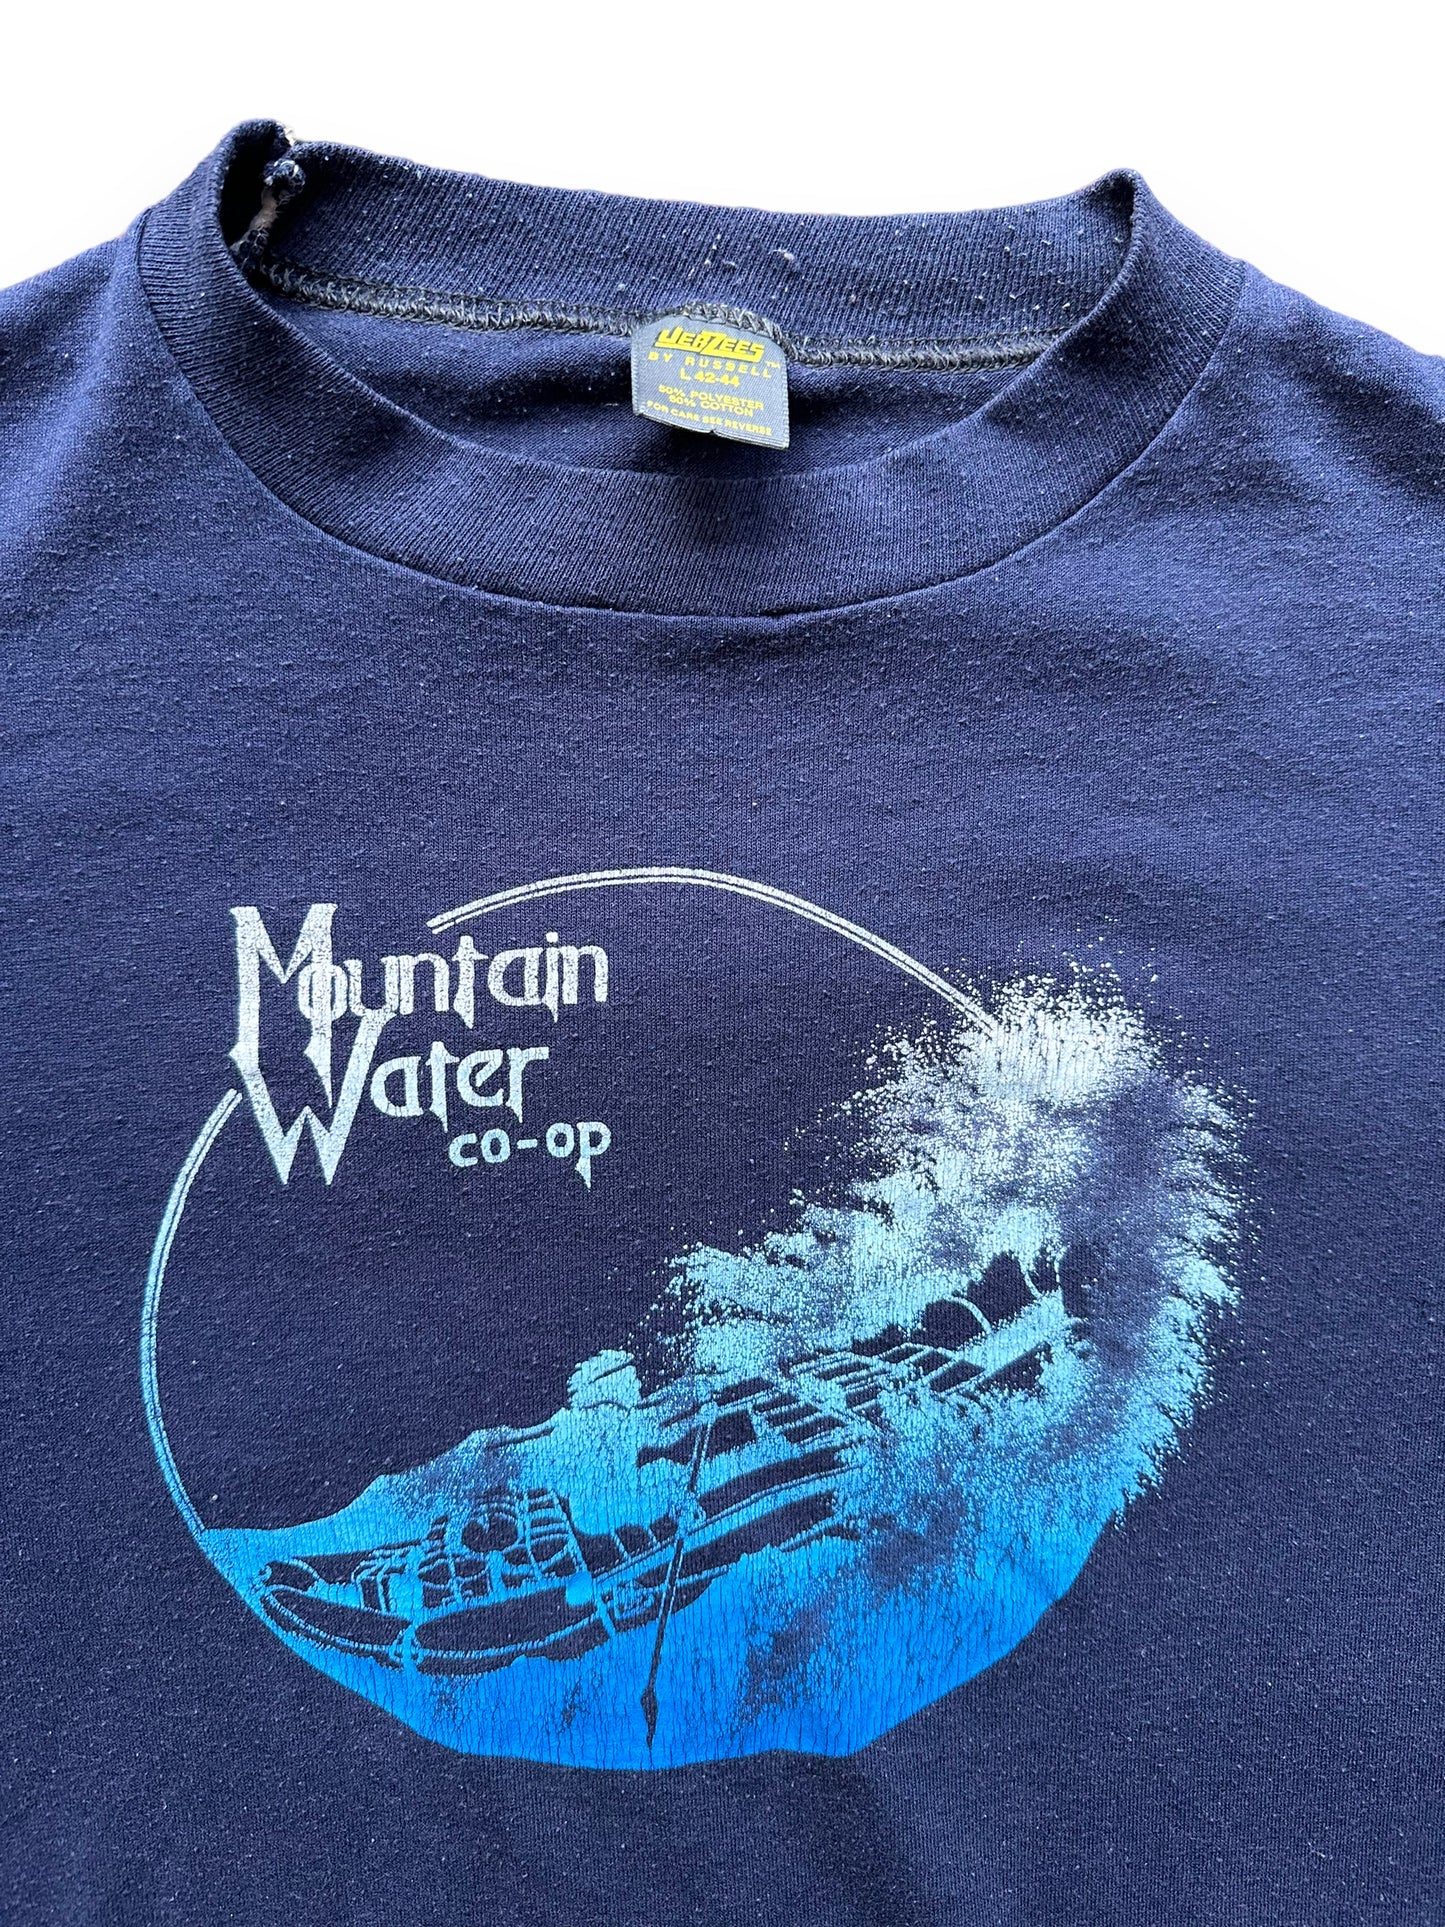 Vintage Mountain Water Co-op Tee The Barn L | Owl Vintage SZ Graphic Seatt – T-Shirts